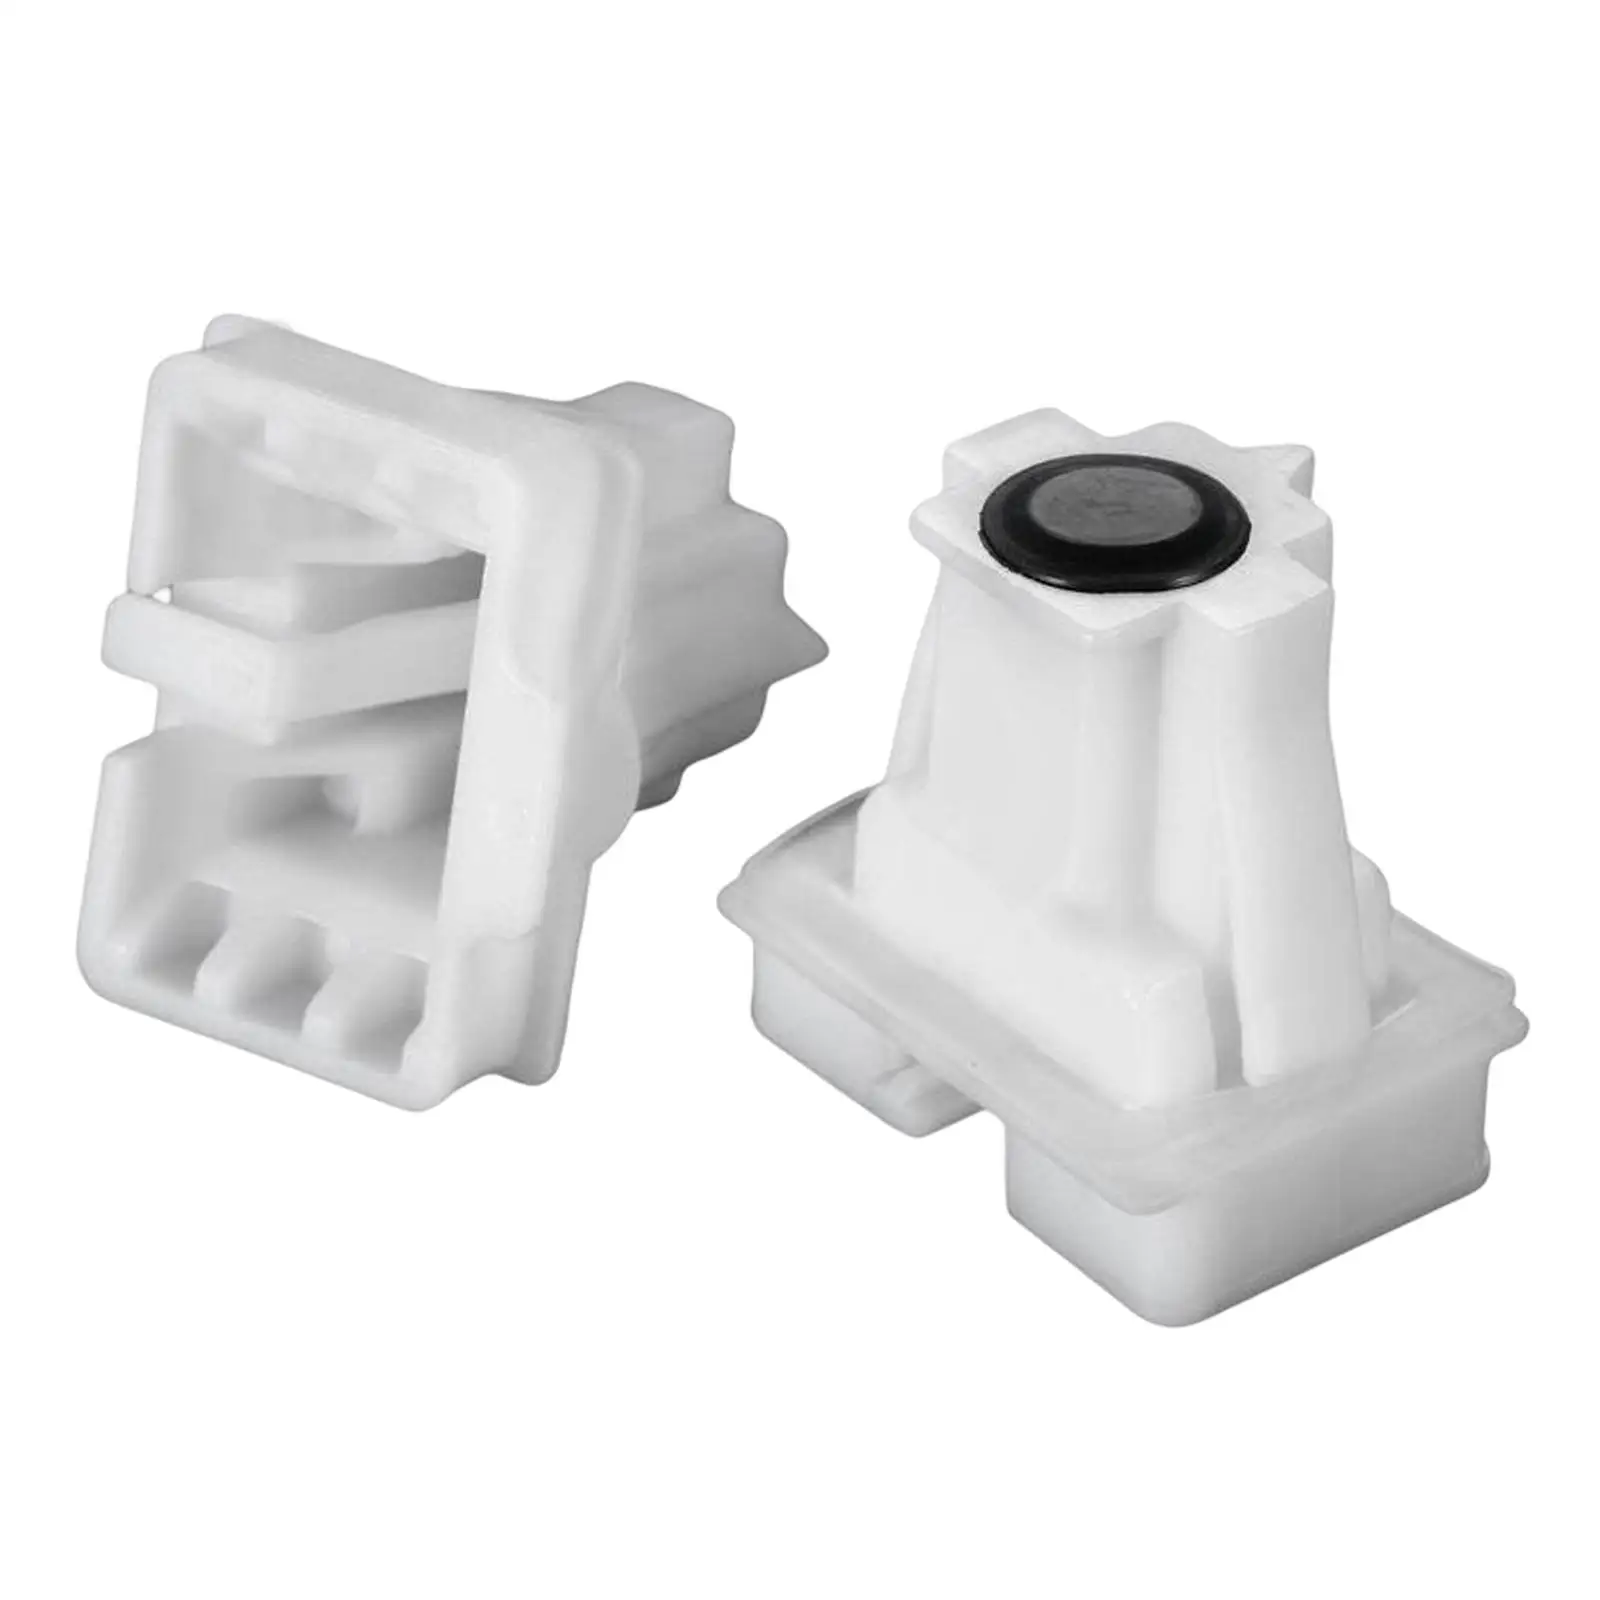 2x Vehicle Rear Seat Cushion Pad Clips 1609267180 White for Citroen C-Elysee C3